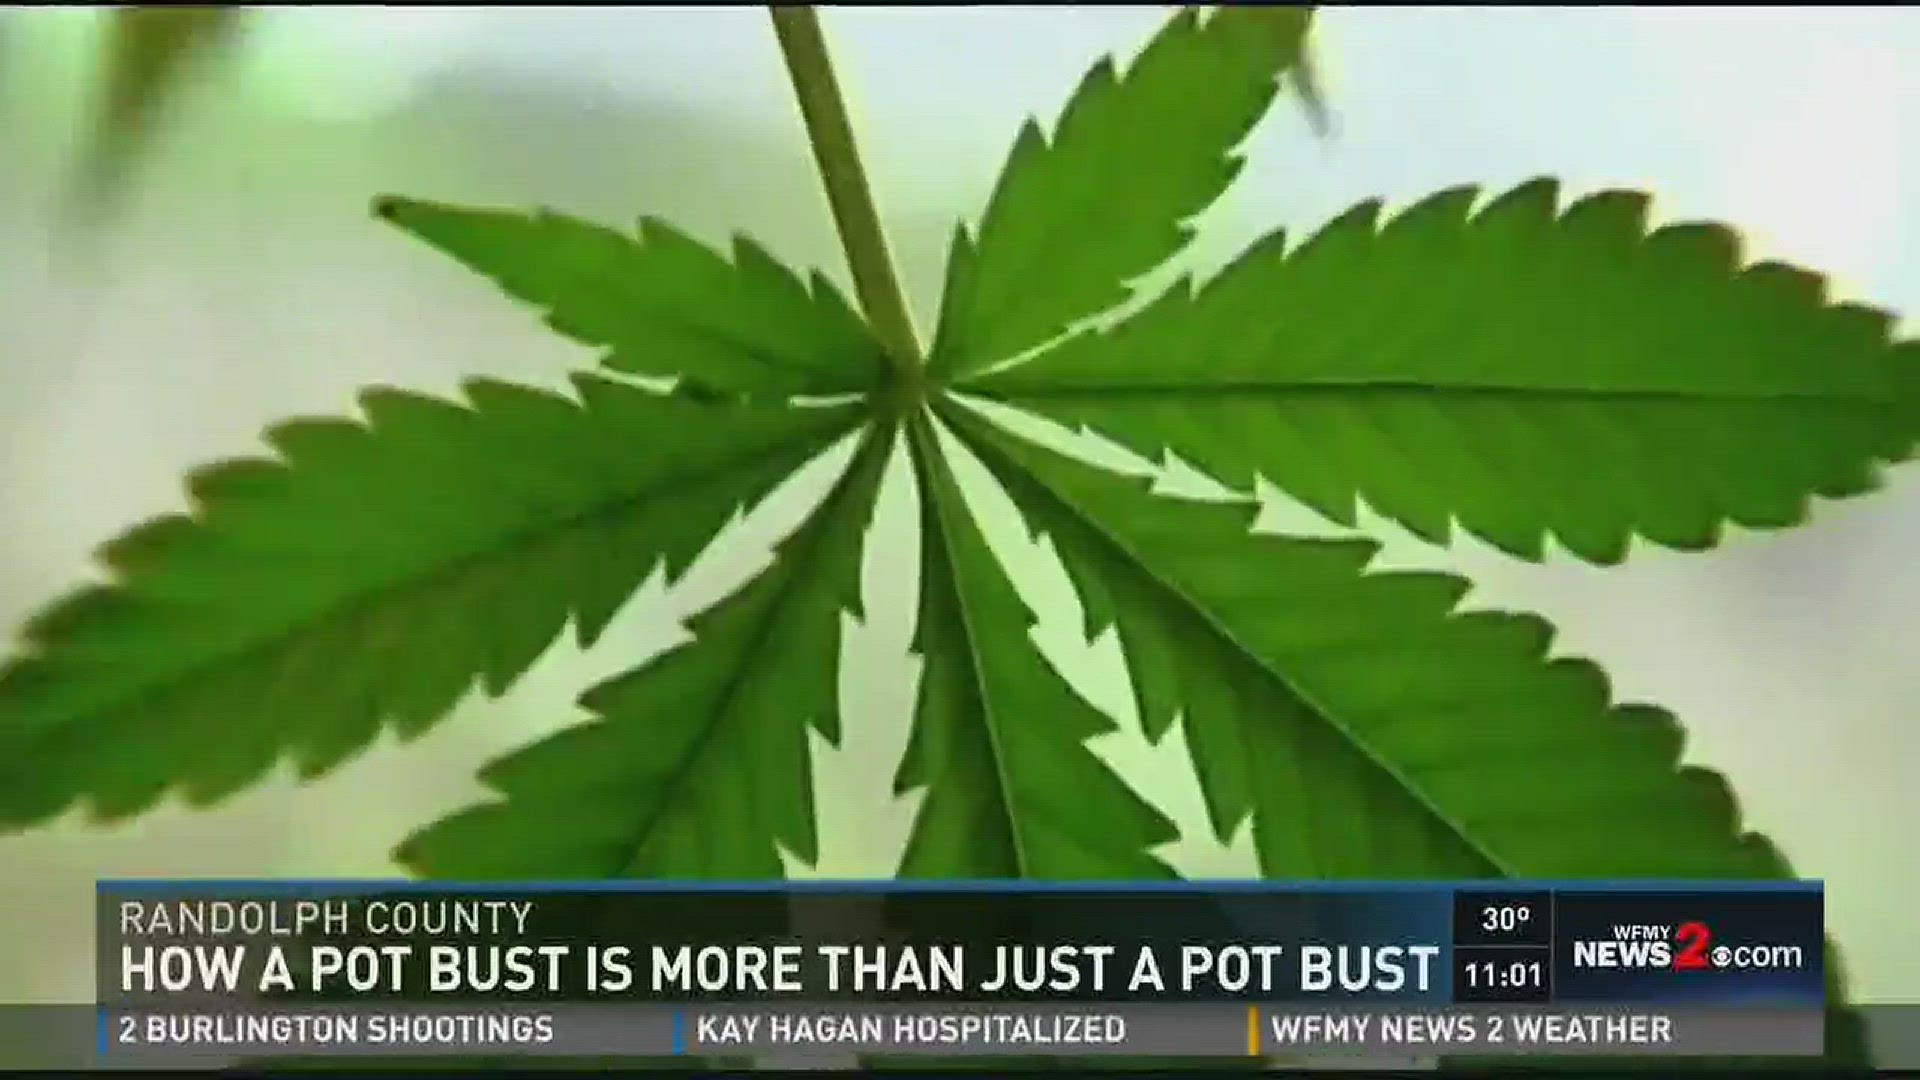 2 Wants To Know: How A Pot Bust Is More Than A Pot Bust